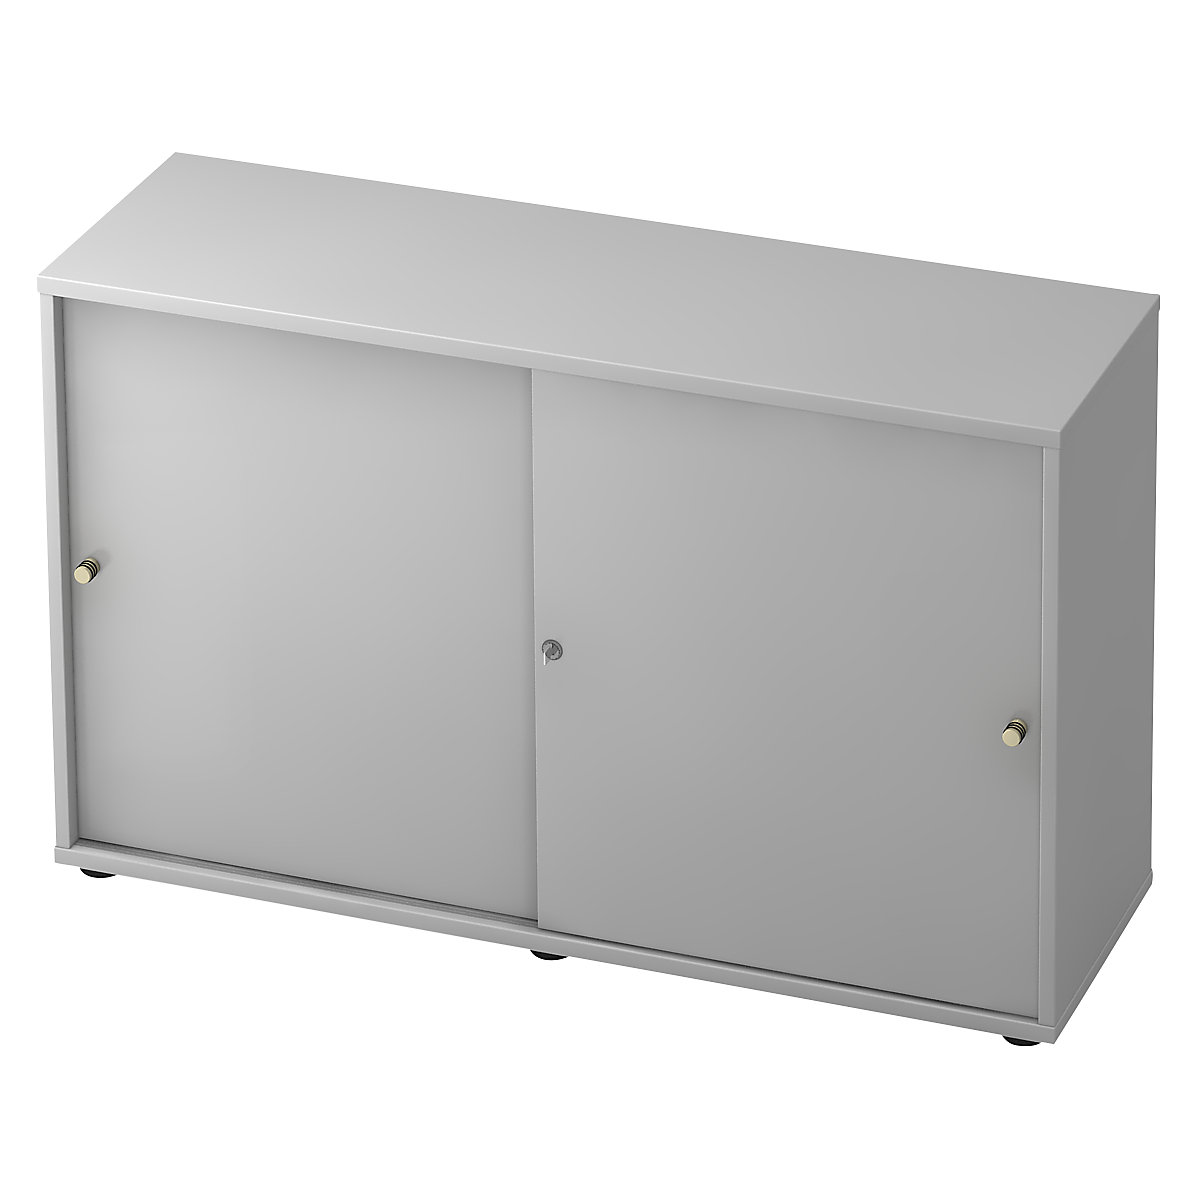 Sliding door cupboard with acoustic rear panel ANNY-AC